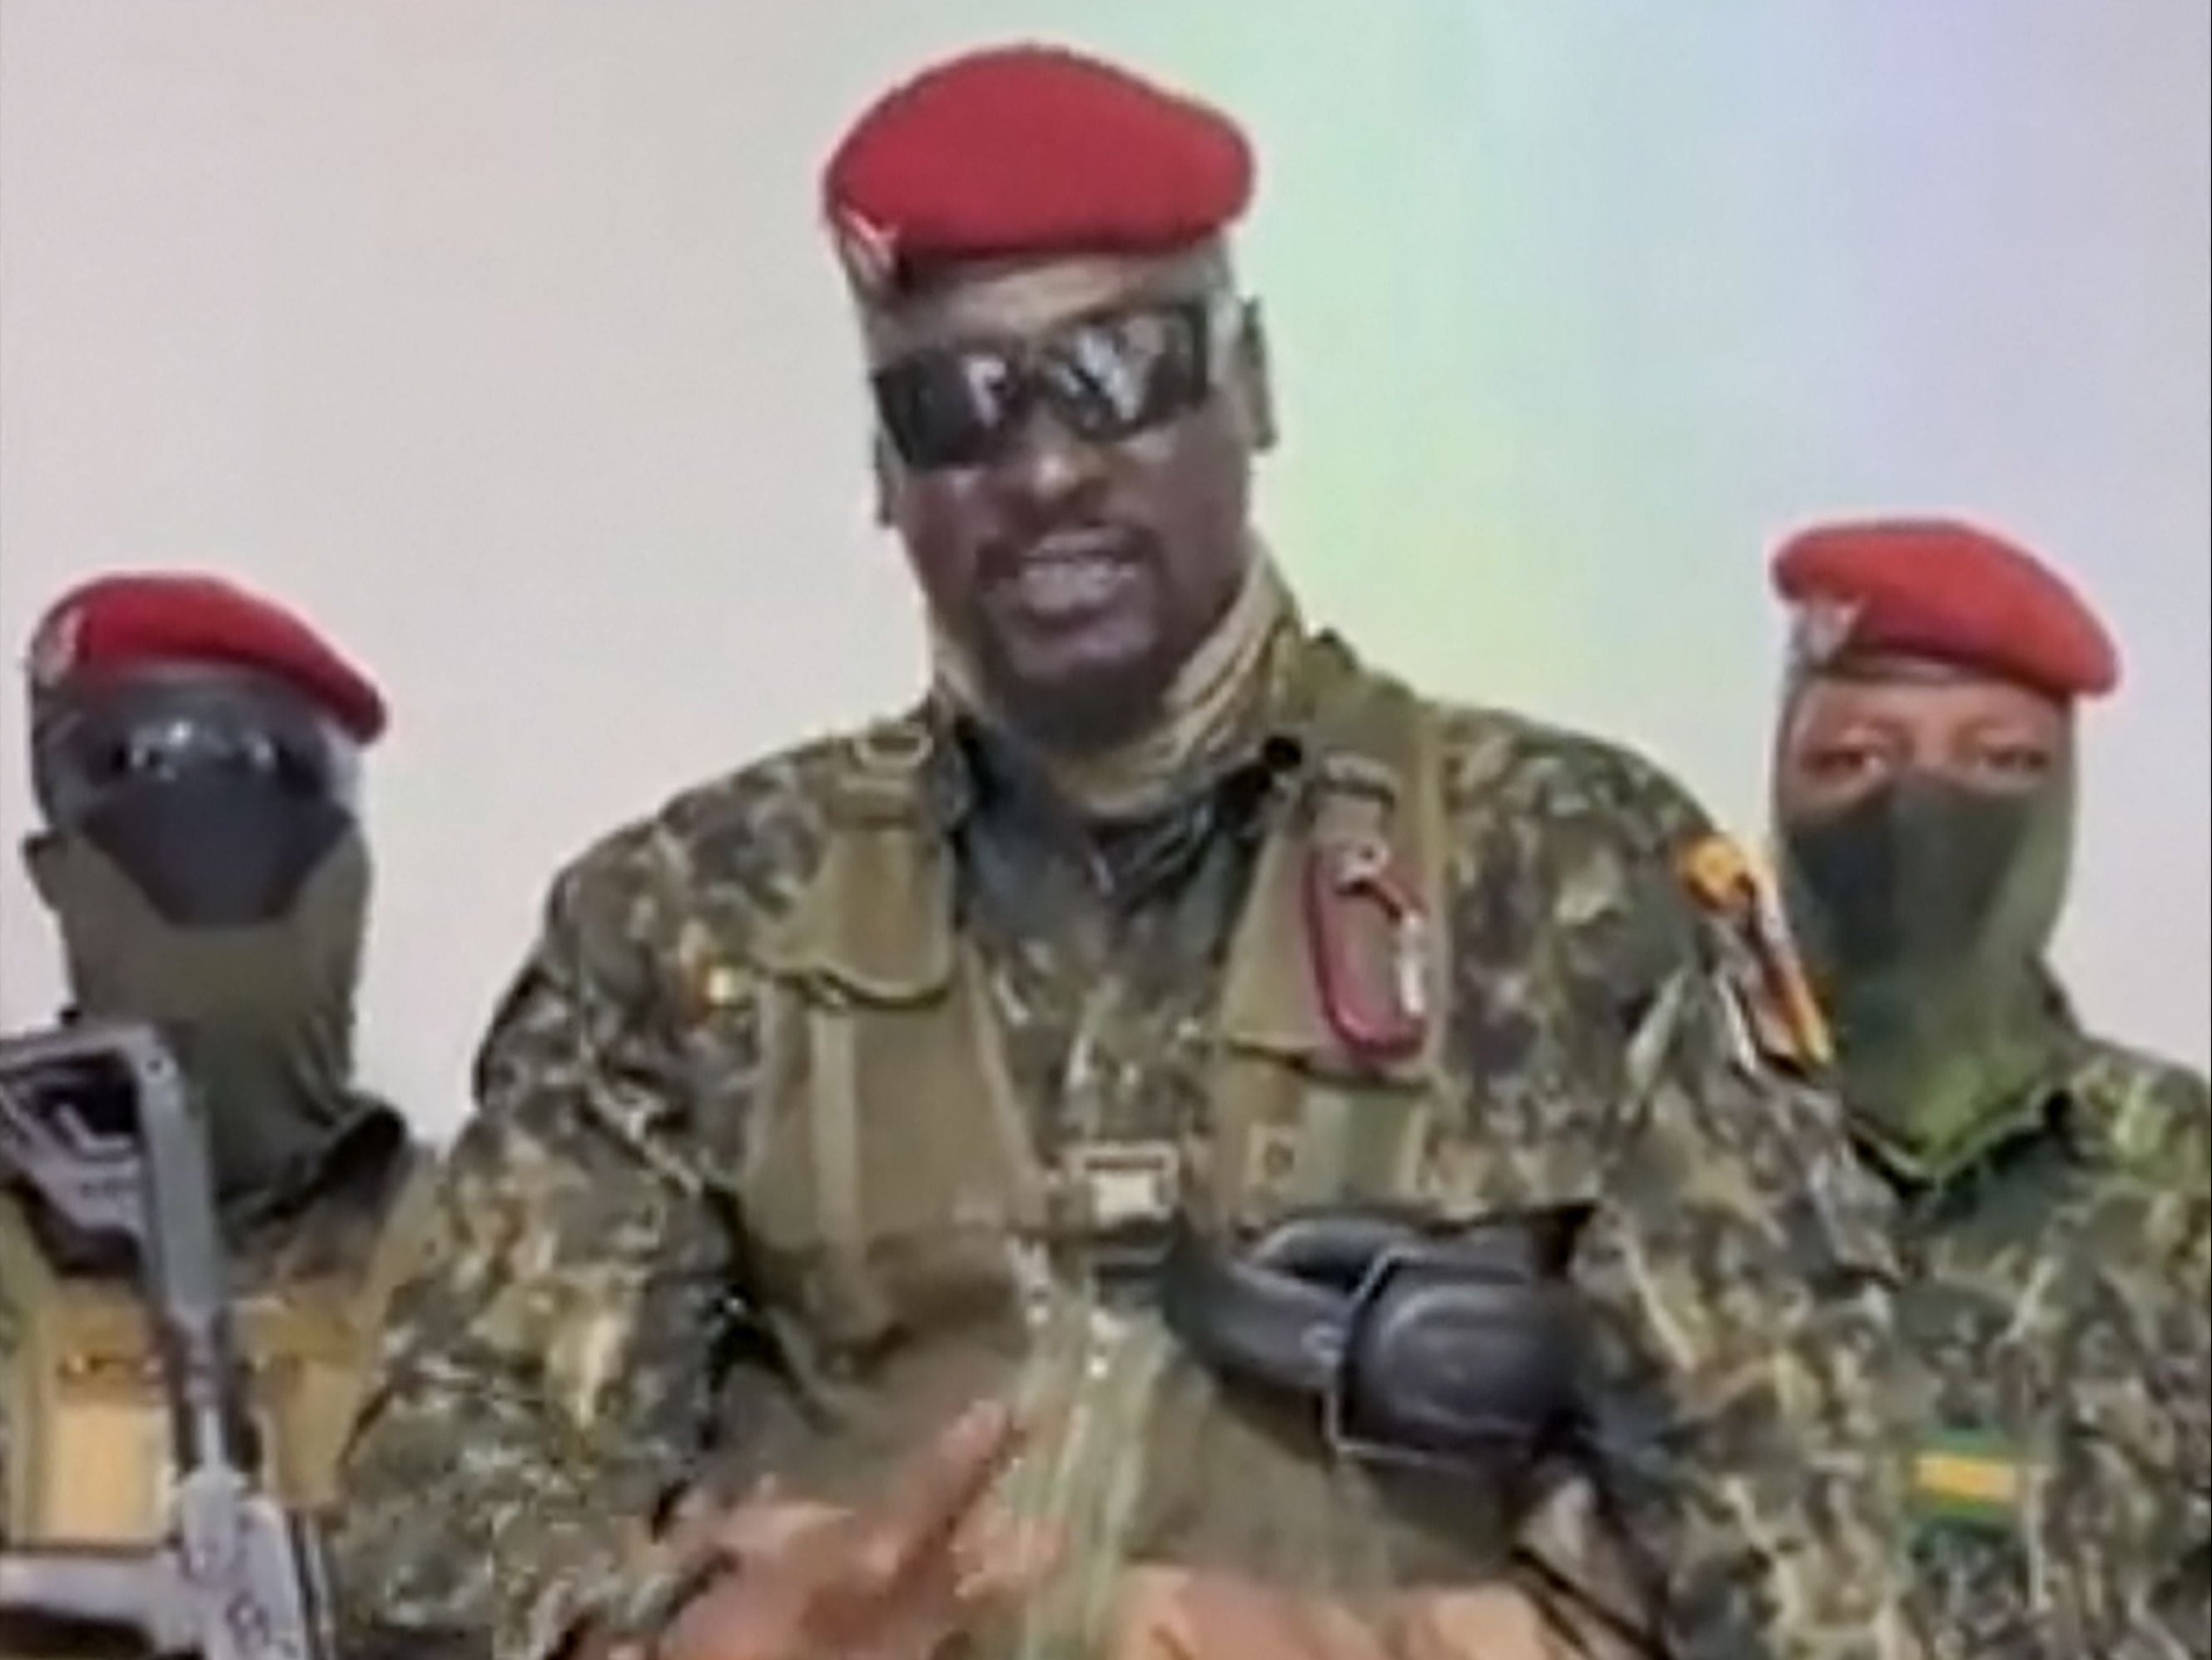 Army colonel Mamadi Doumbouya announced on state television that Guinea’s border had been closed following the capture of the country’s president